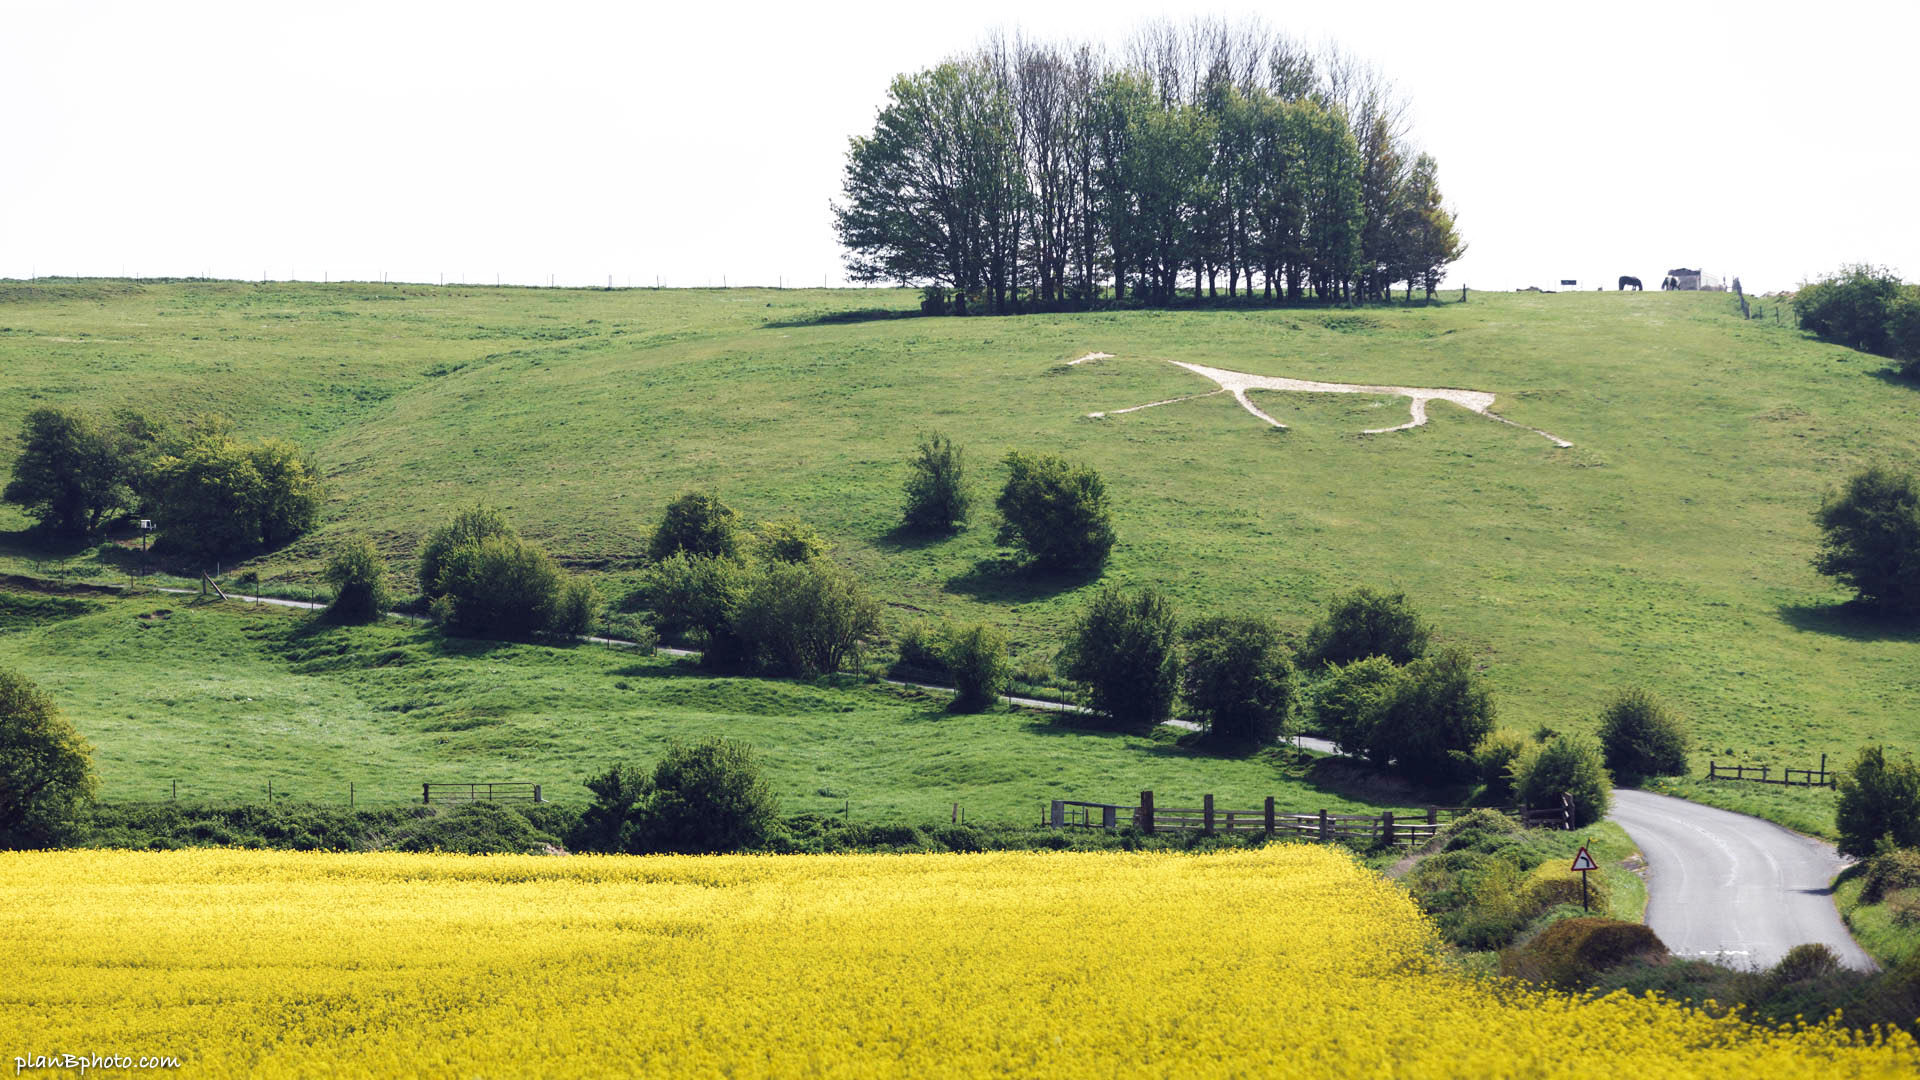 Hackpen White Horse on the green hill near a yellow field of raps flowers